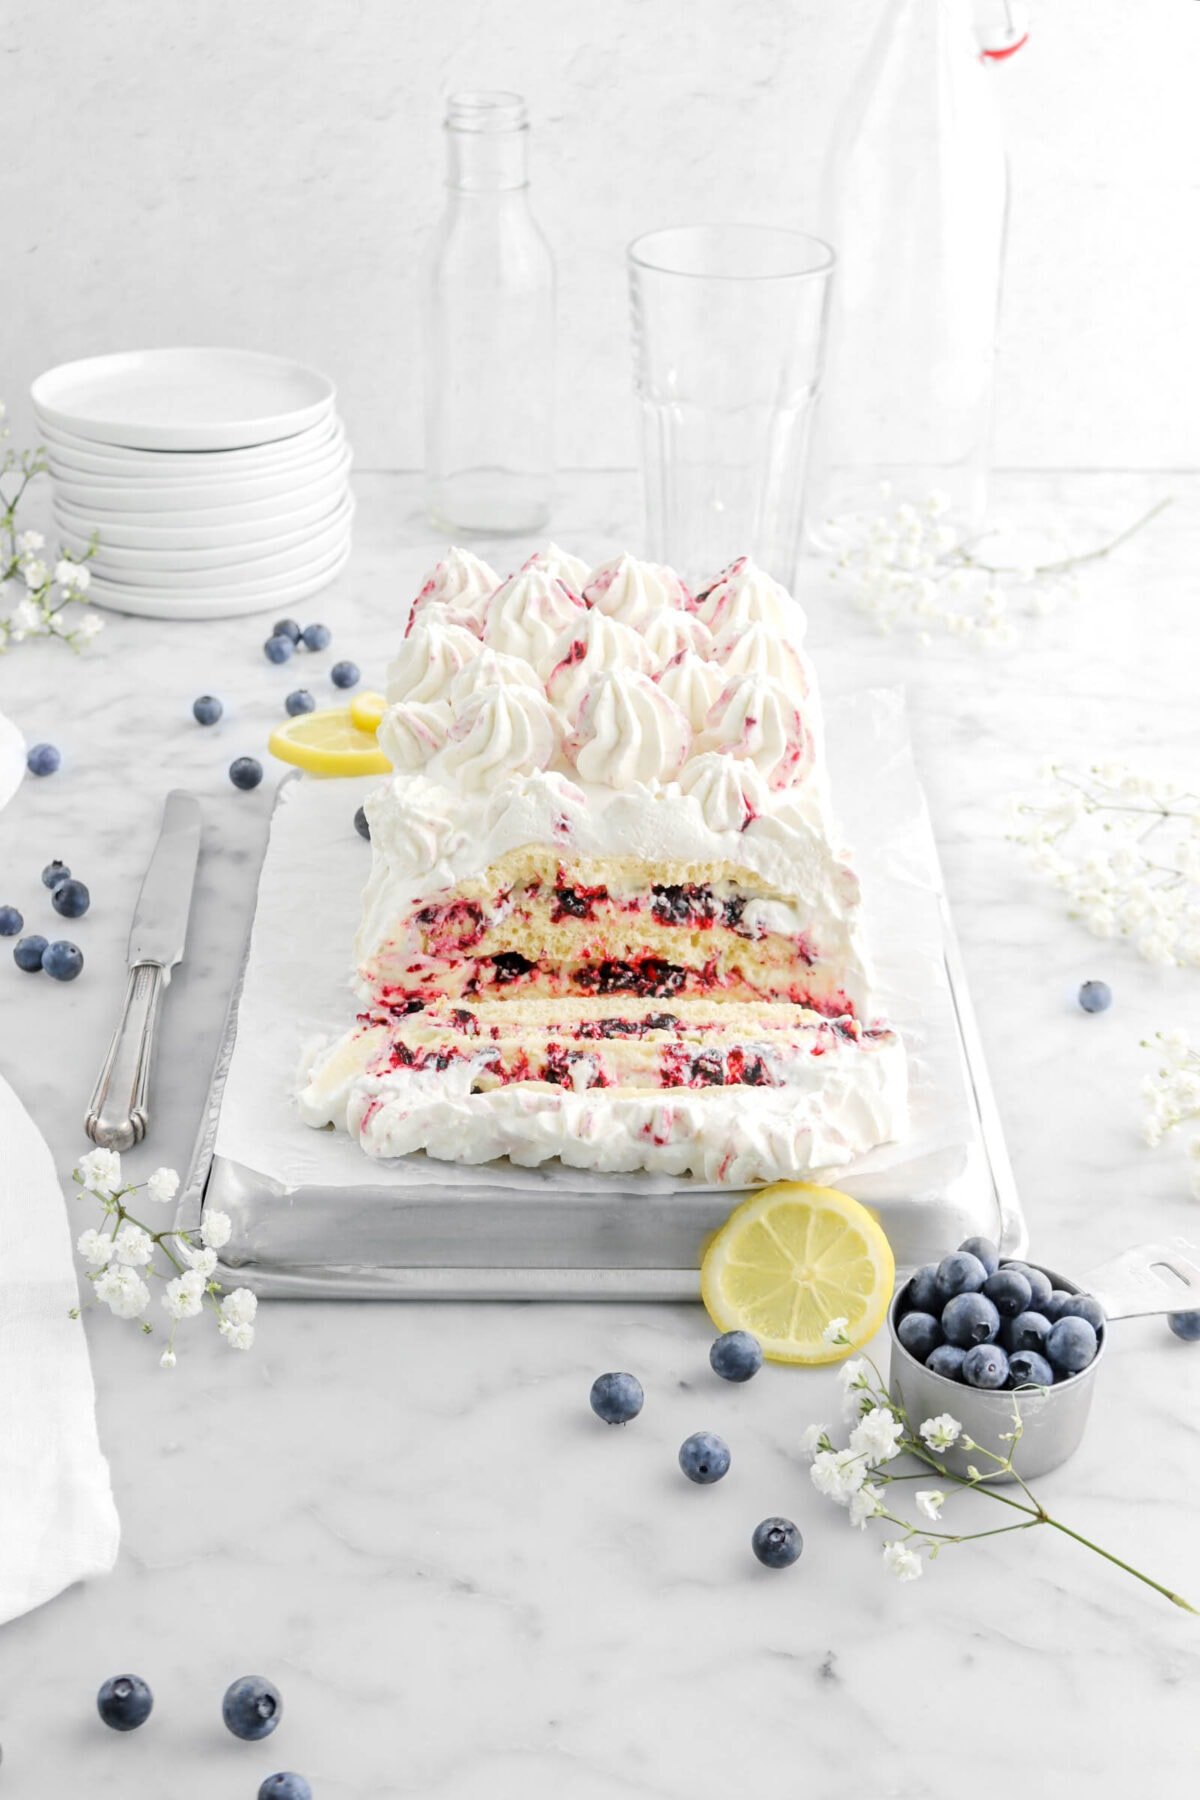 lemon blueberry icebox cake on upside down sheet pan with slice laying in front, a knife beside, blueberries, lemon slices, and flowers around, with stack of plates and empty glasses behind on marble surface